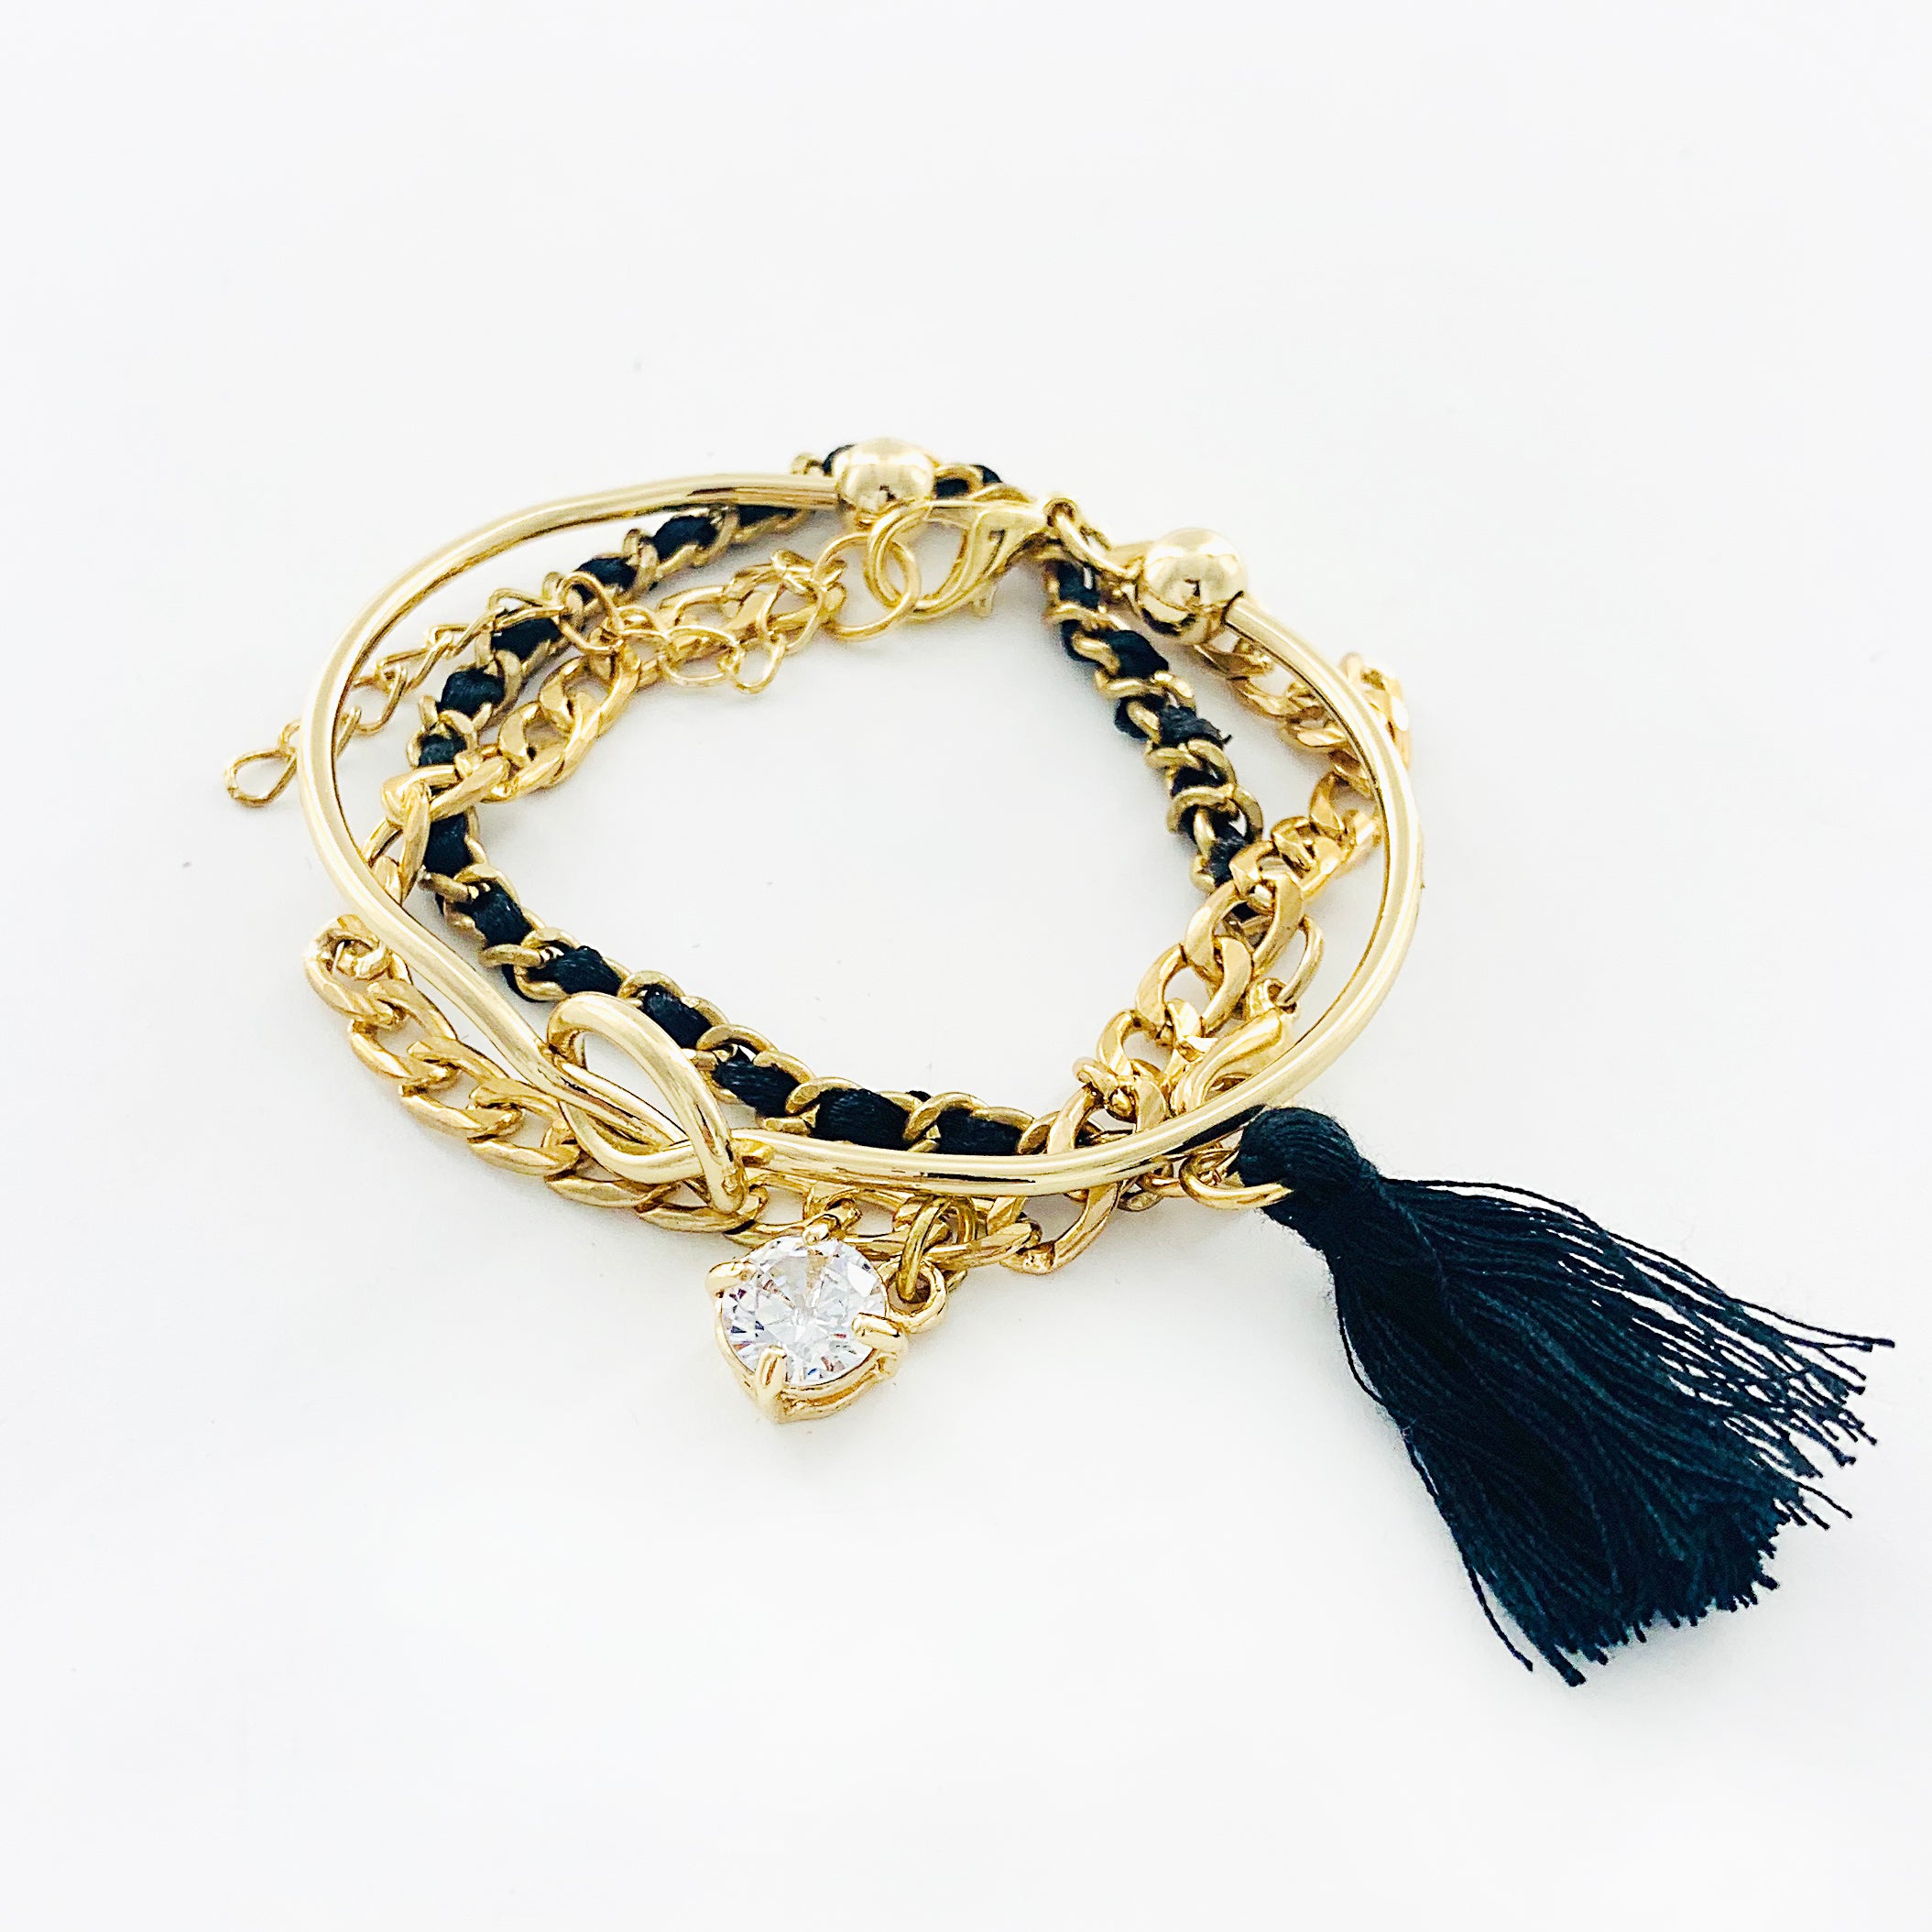 Black and gold multi bracelets with tassel and diamante charm